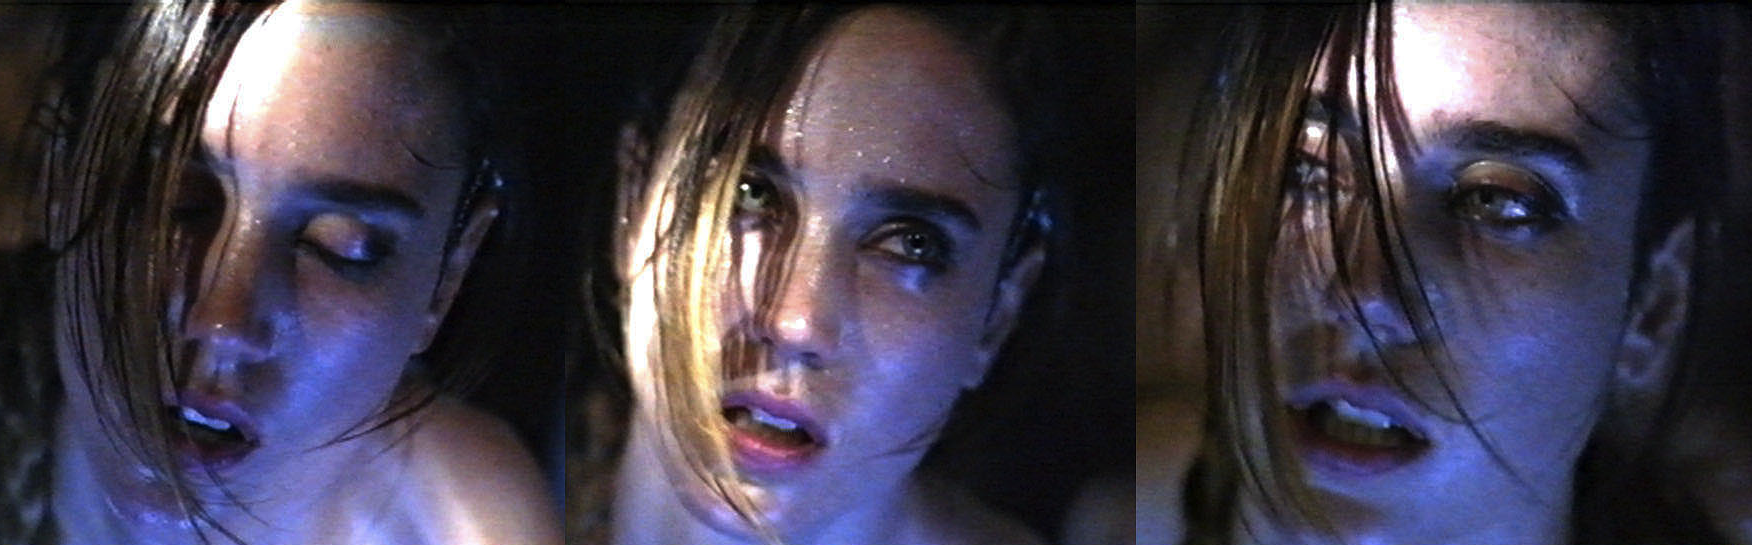 Dr. Giallo on Twitter: "JENNIFER CONNELLY turns 45 today #HappyBirthda...